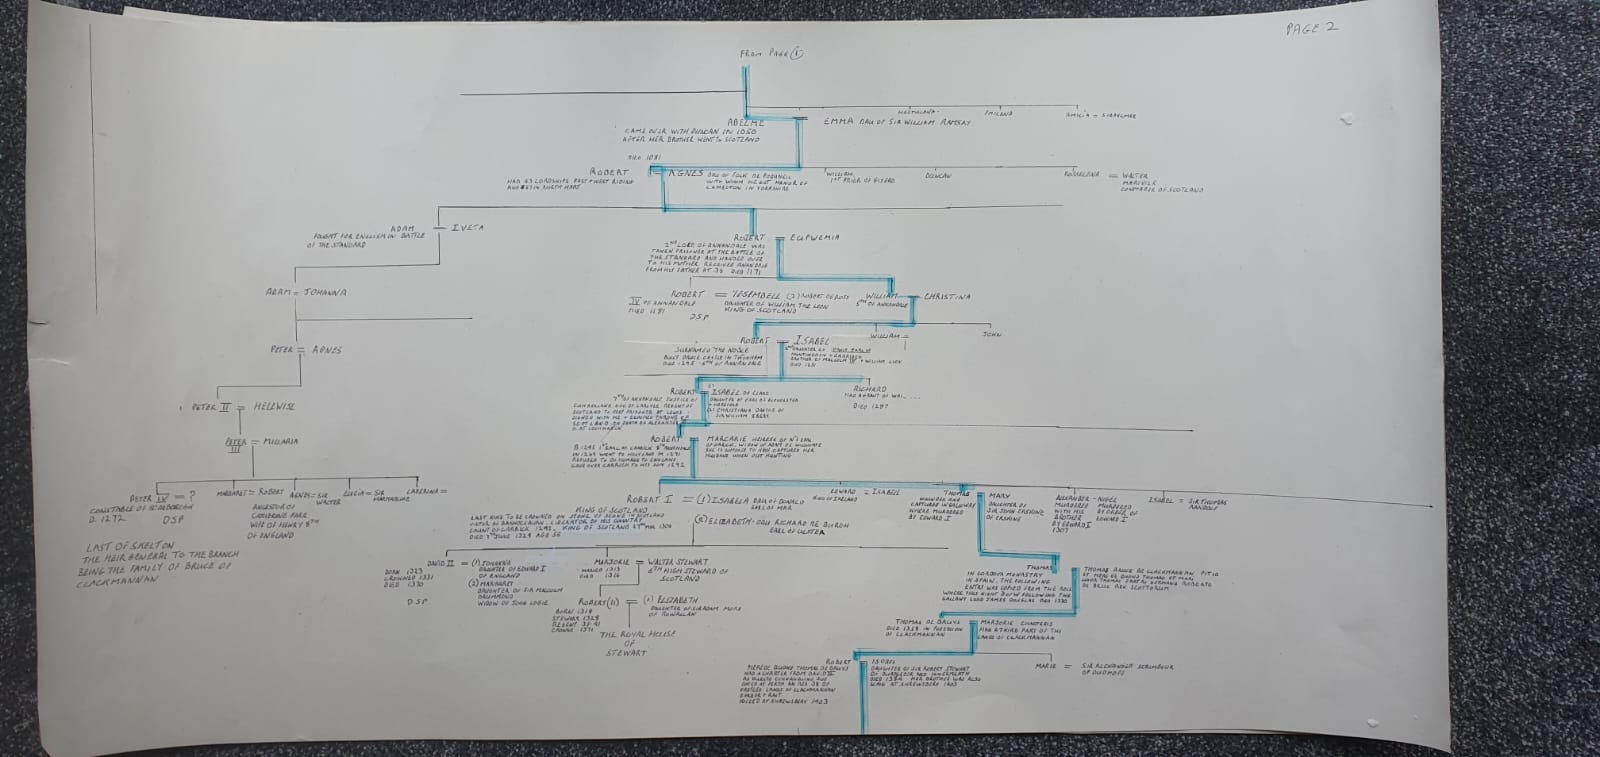 Part of Ian Russell's Bruce Family Tree